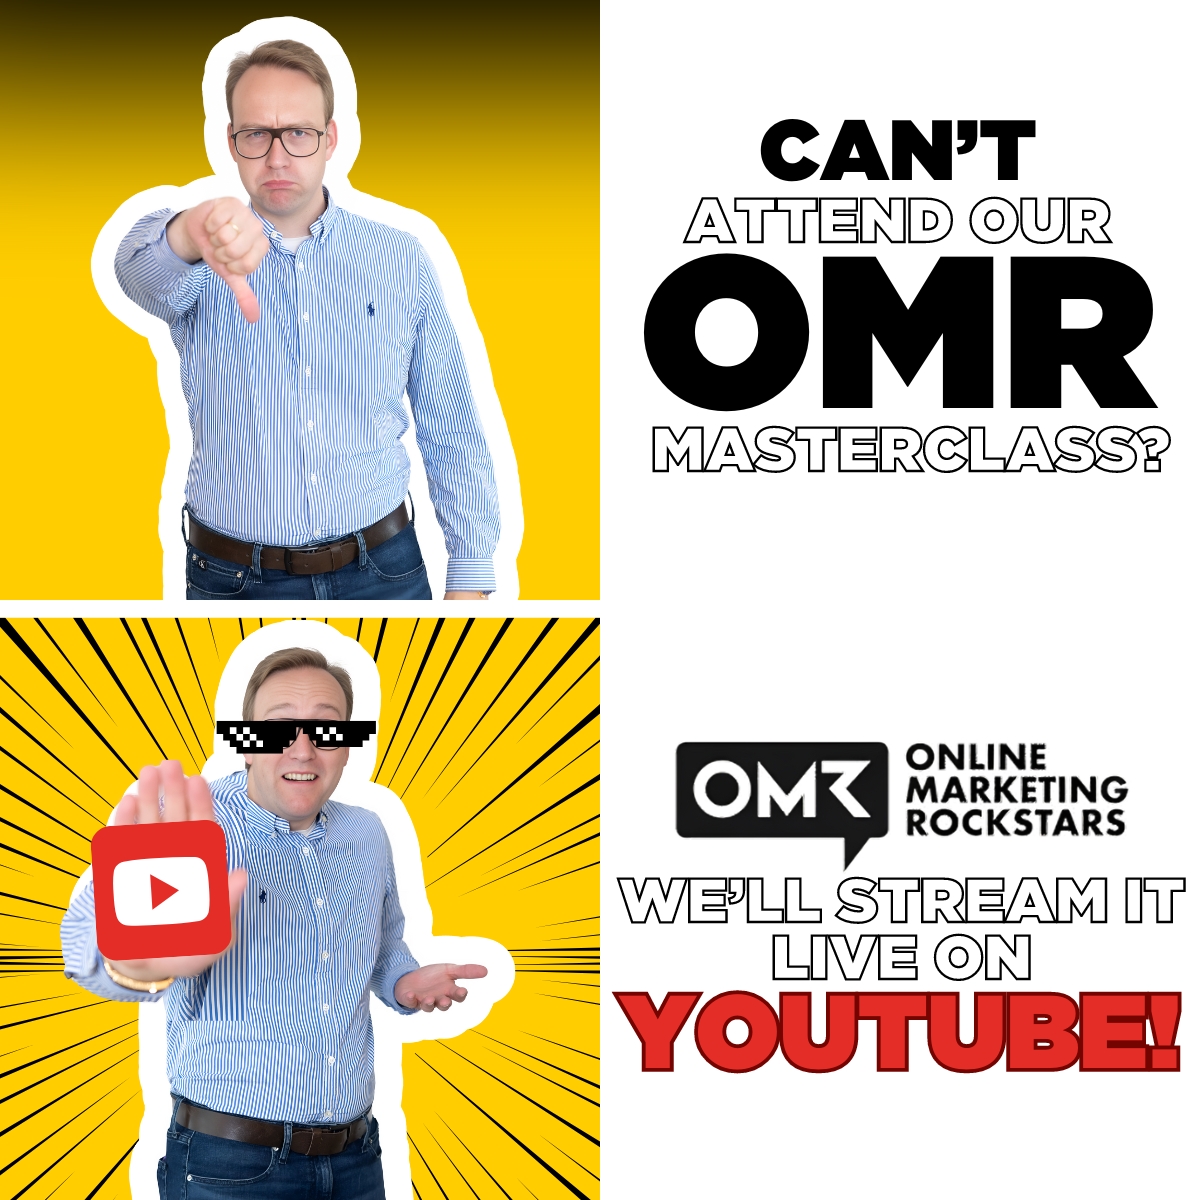 Can't attend our #OMR24 masterclass on May 8th? No worries! We’ve got you covered. Tune in LIVE on our YouTube channel from 12:45 PM to 2:00 PM (German Time) to catch all the action! Here’s why you don’t want to miss it: 🔎 Exclusive insights on LinkedIn, TikTok, Facebook,…